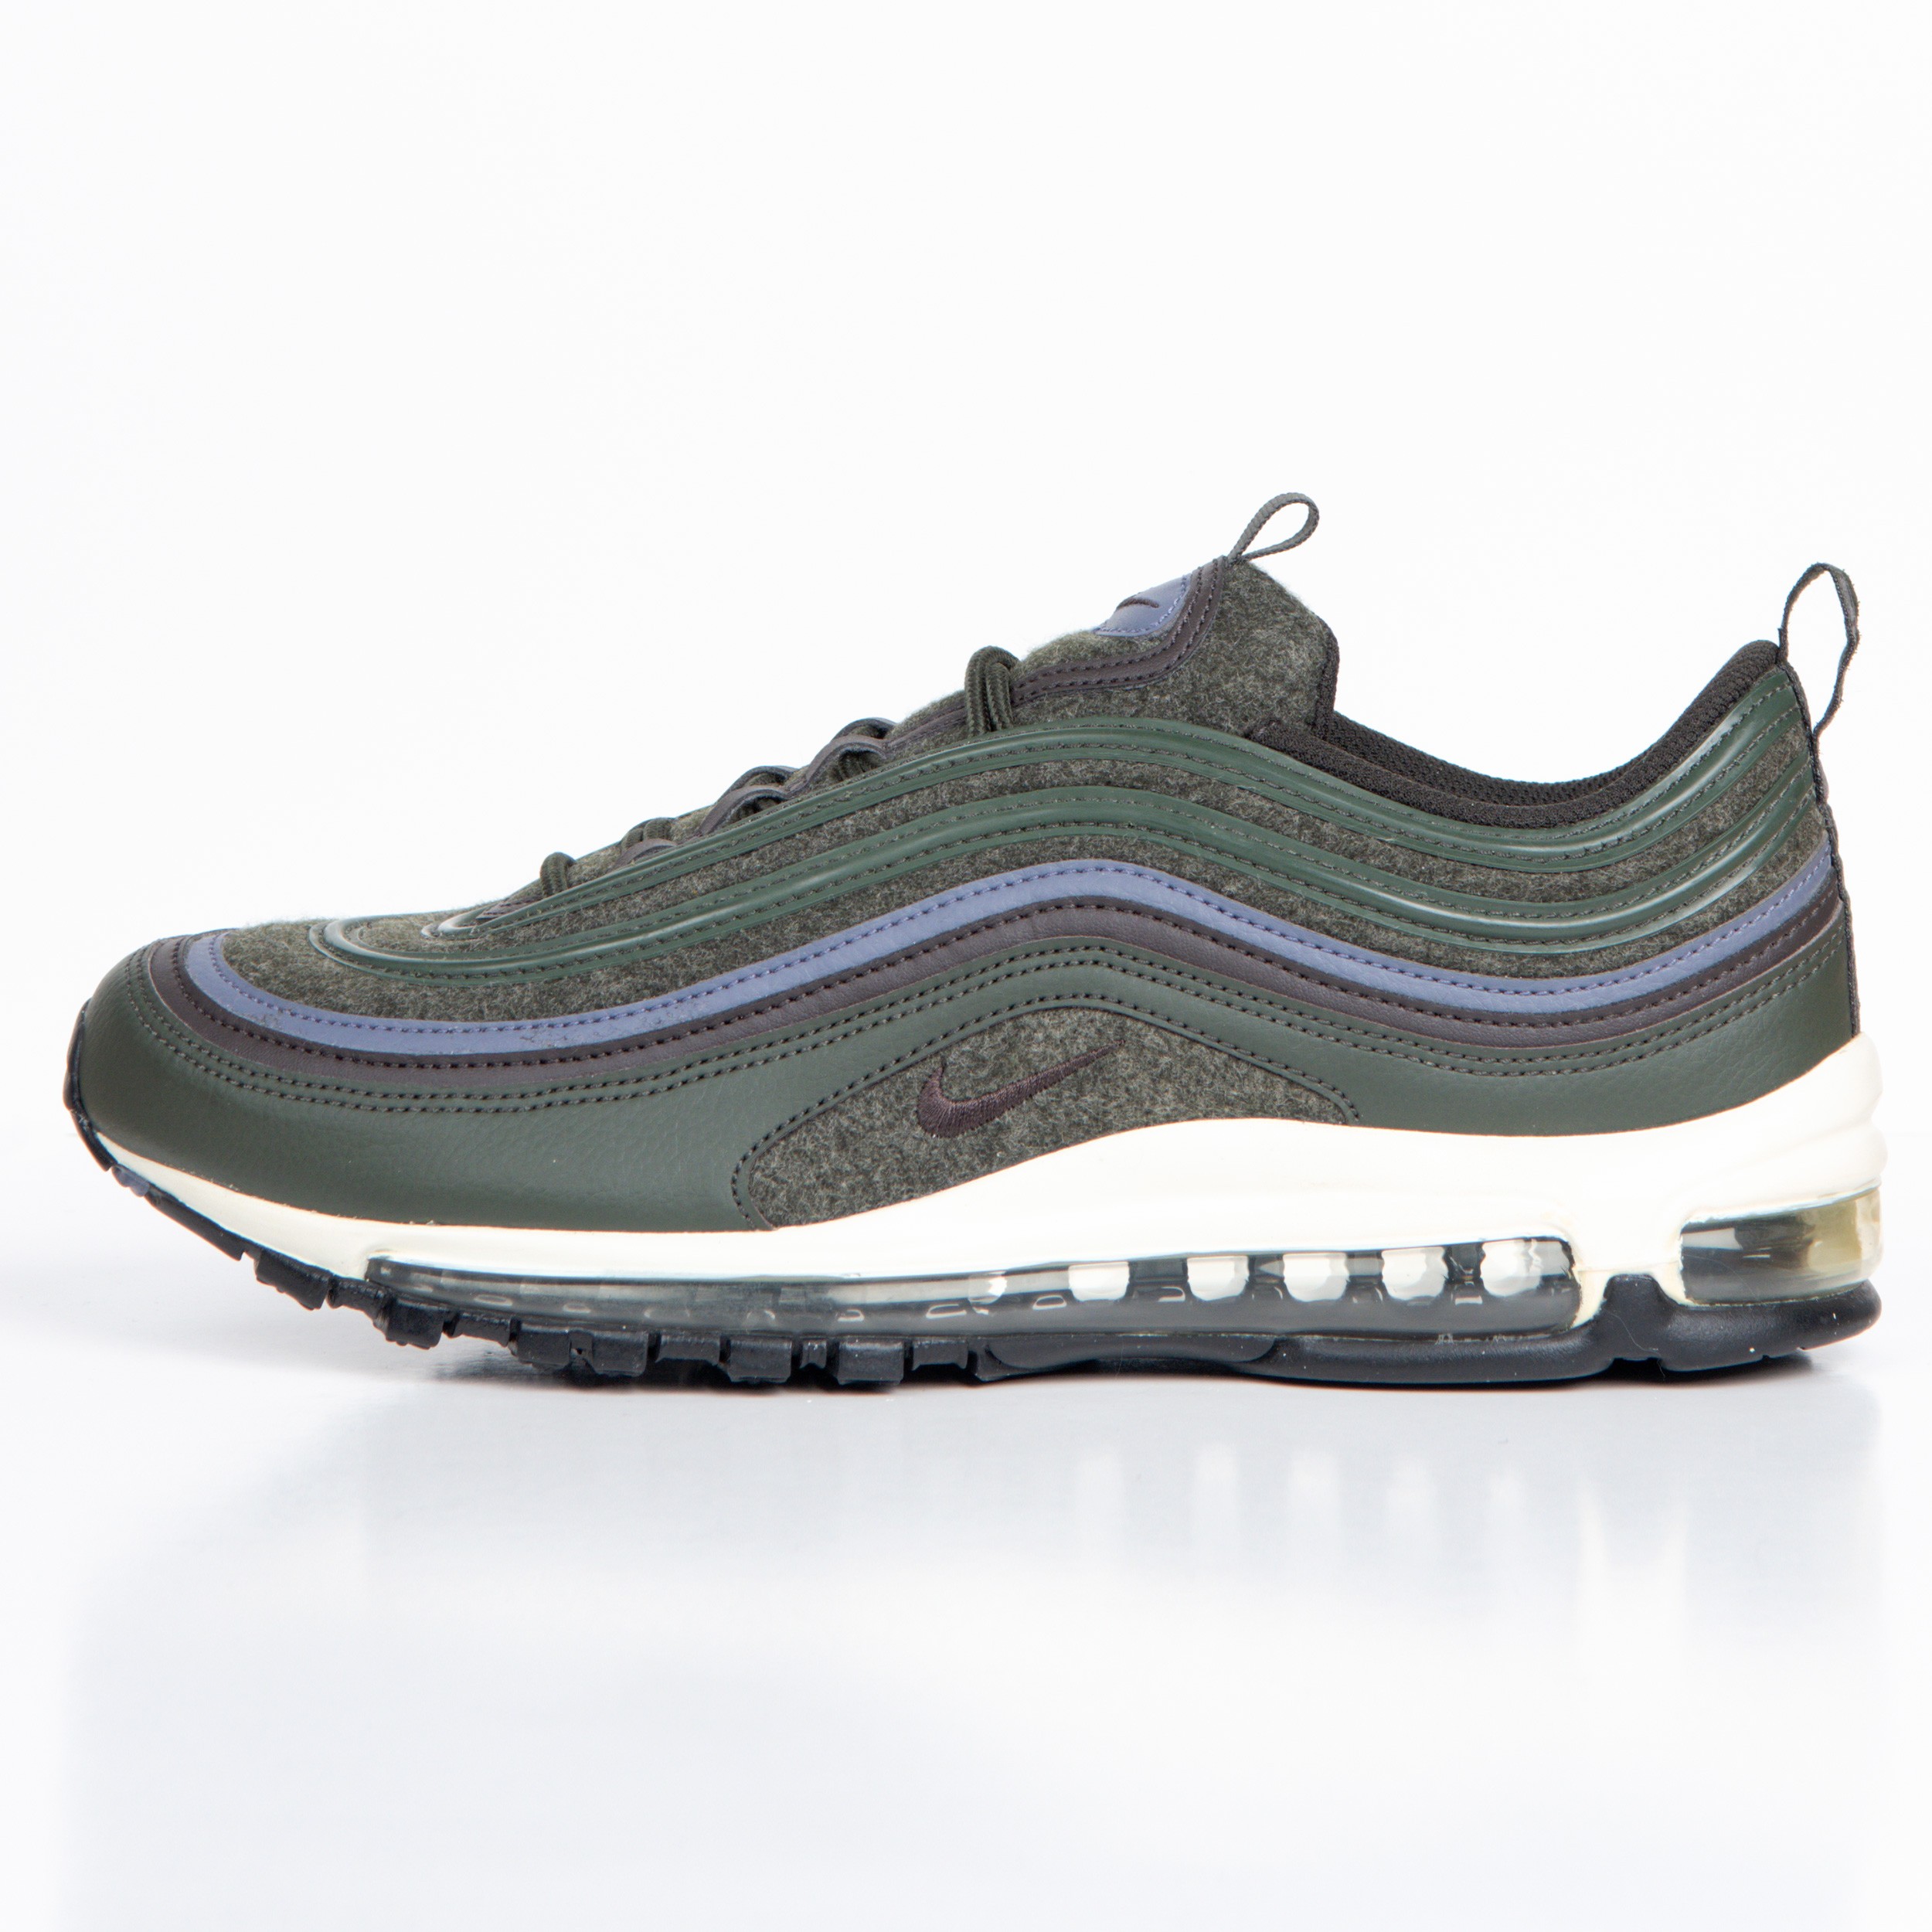 RE-POCKETS NIKE TRAINERS RE-POCKETS Nike Air Max 97 Wool Sequoia